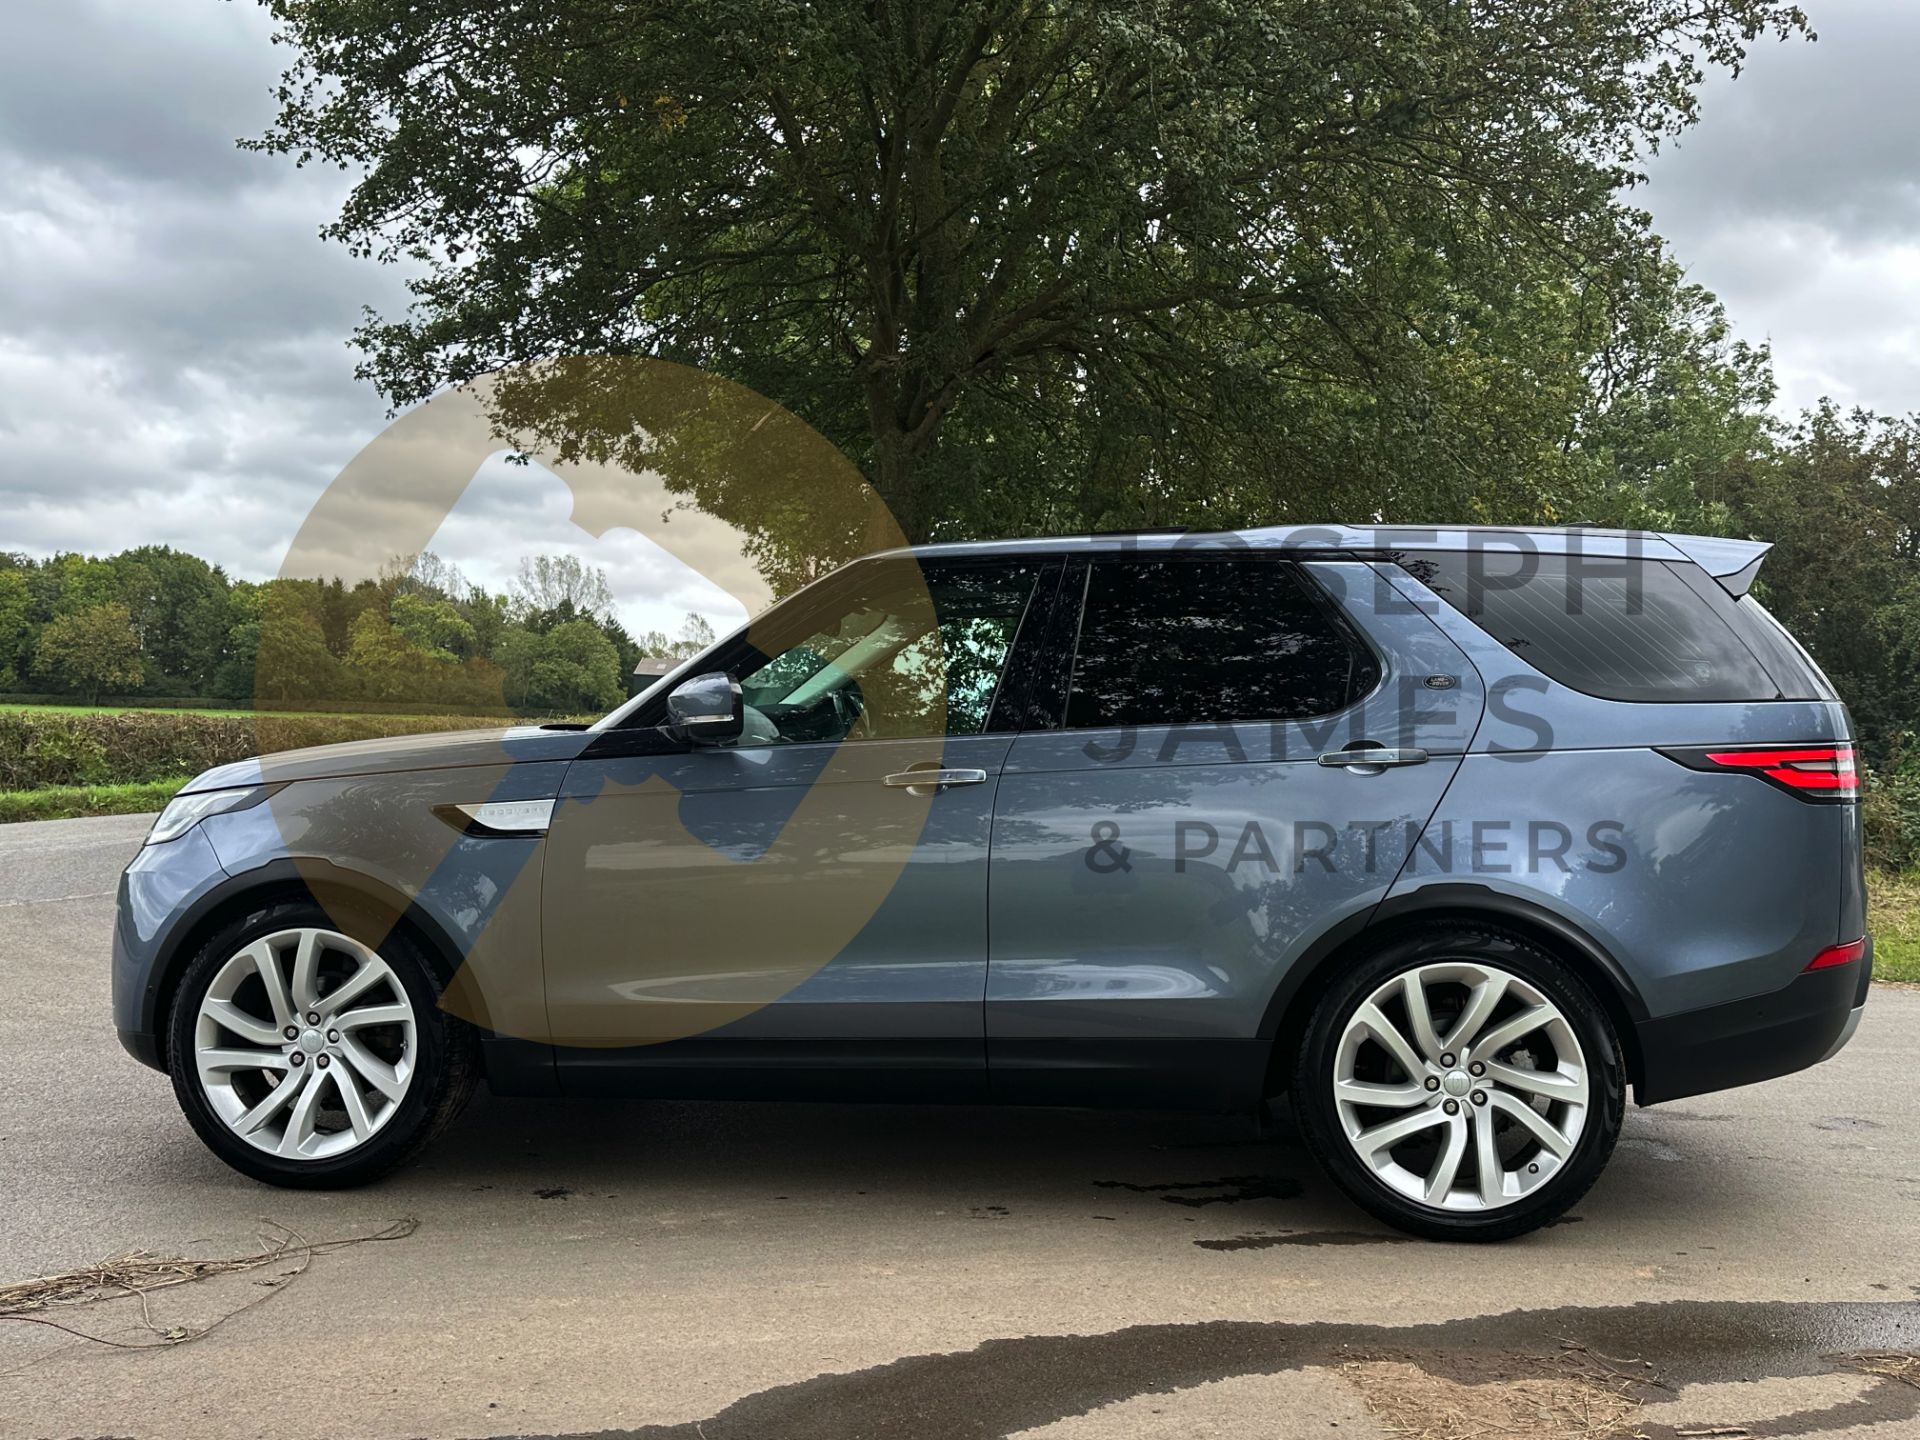 (ON SALE) LAND ROVER DISCOVERY 5 *HSE LUXURY* 7 SEATER SUV (2018 - FACELIFT MODEL) (LOW MILEAGE) - Image 8 of 66